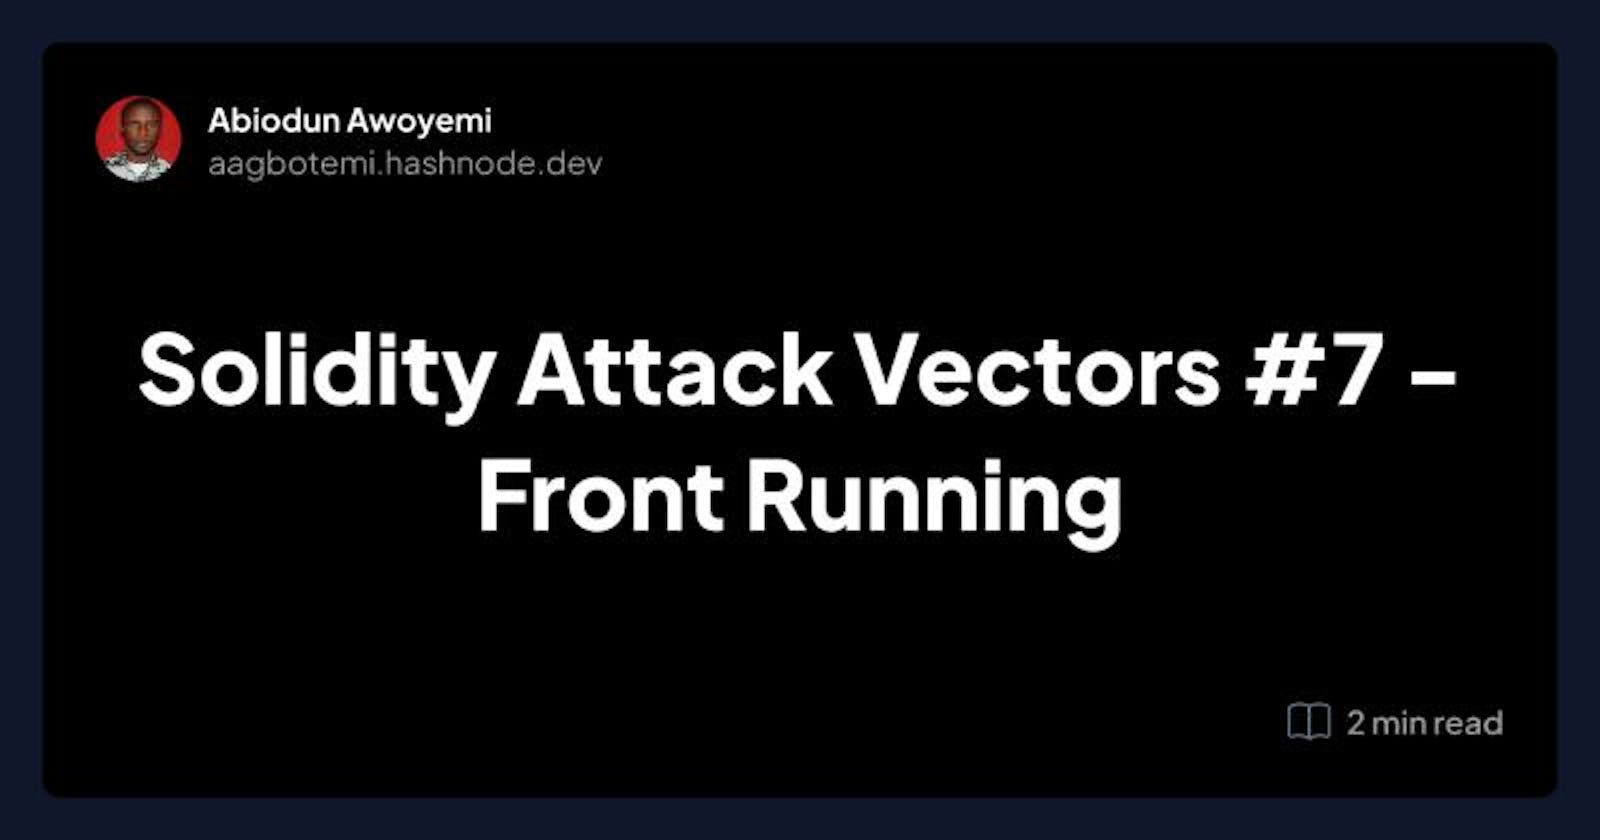 Solidity Attack Vectors #7 - Front Running